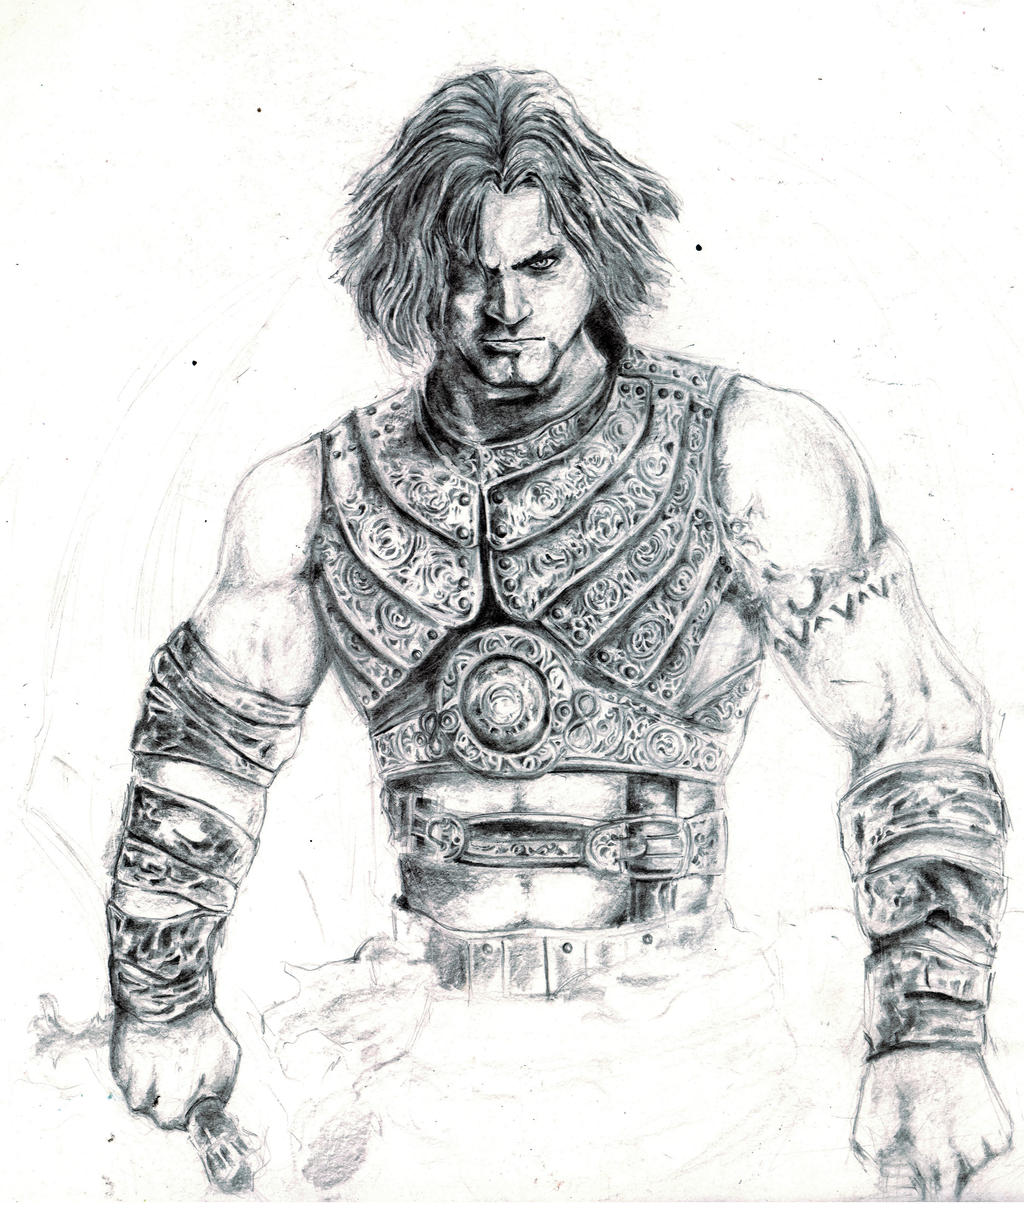 Prince of Persia: ''Warrior Within'' by artmirka on DeviantArt